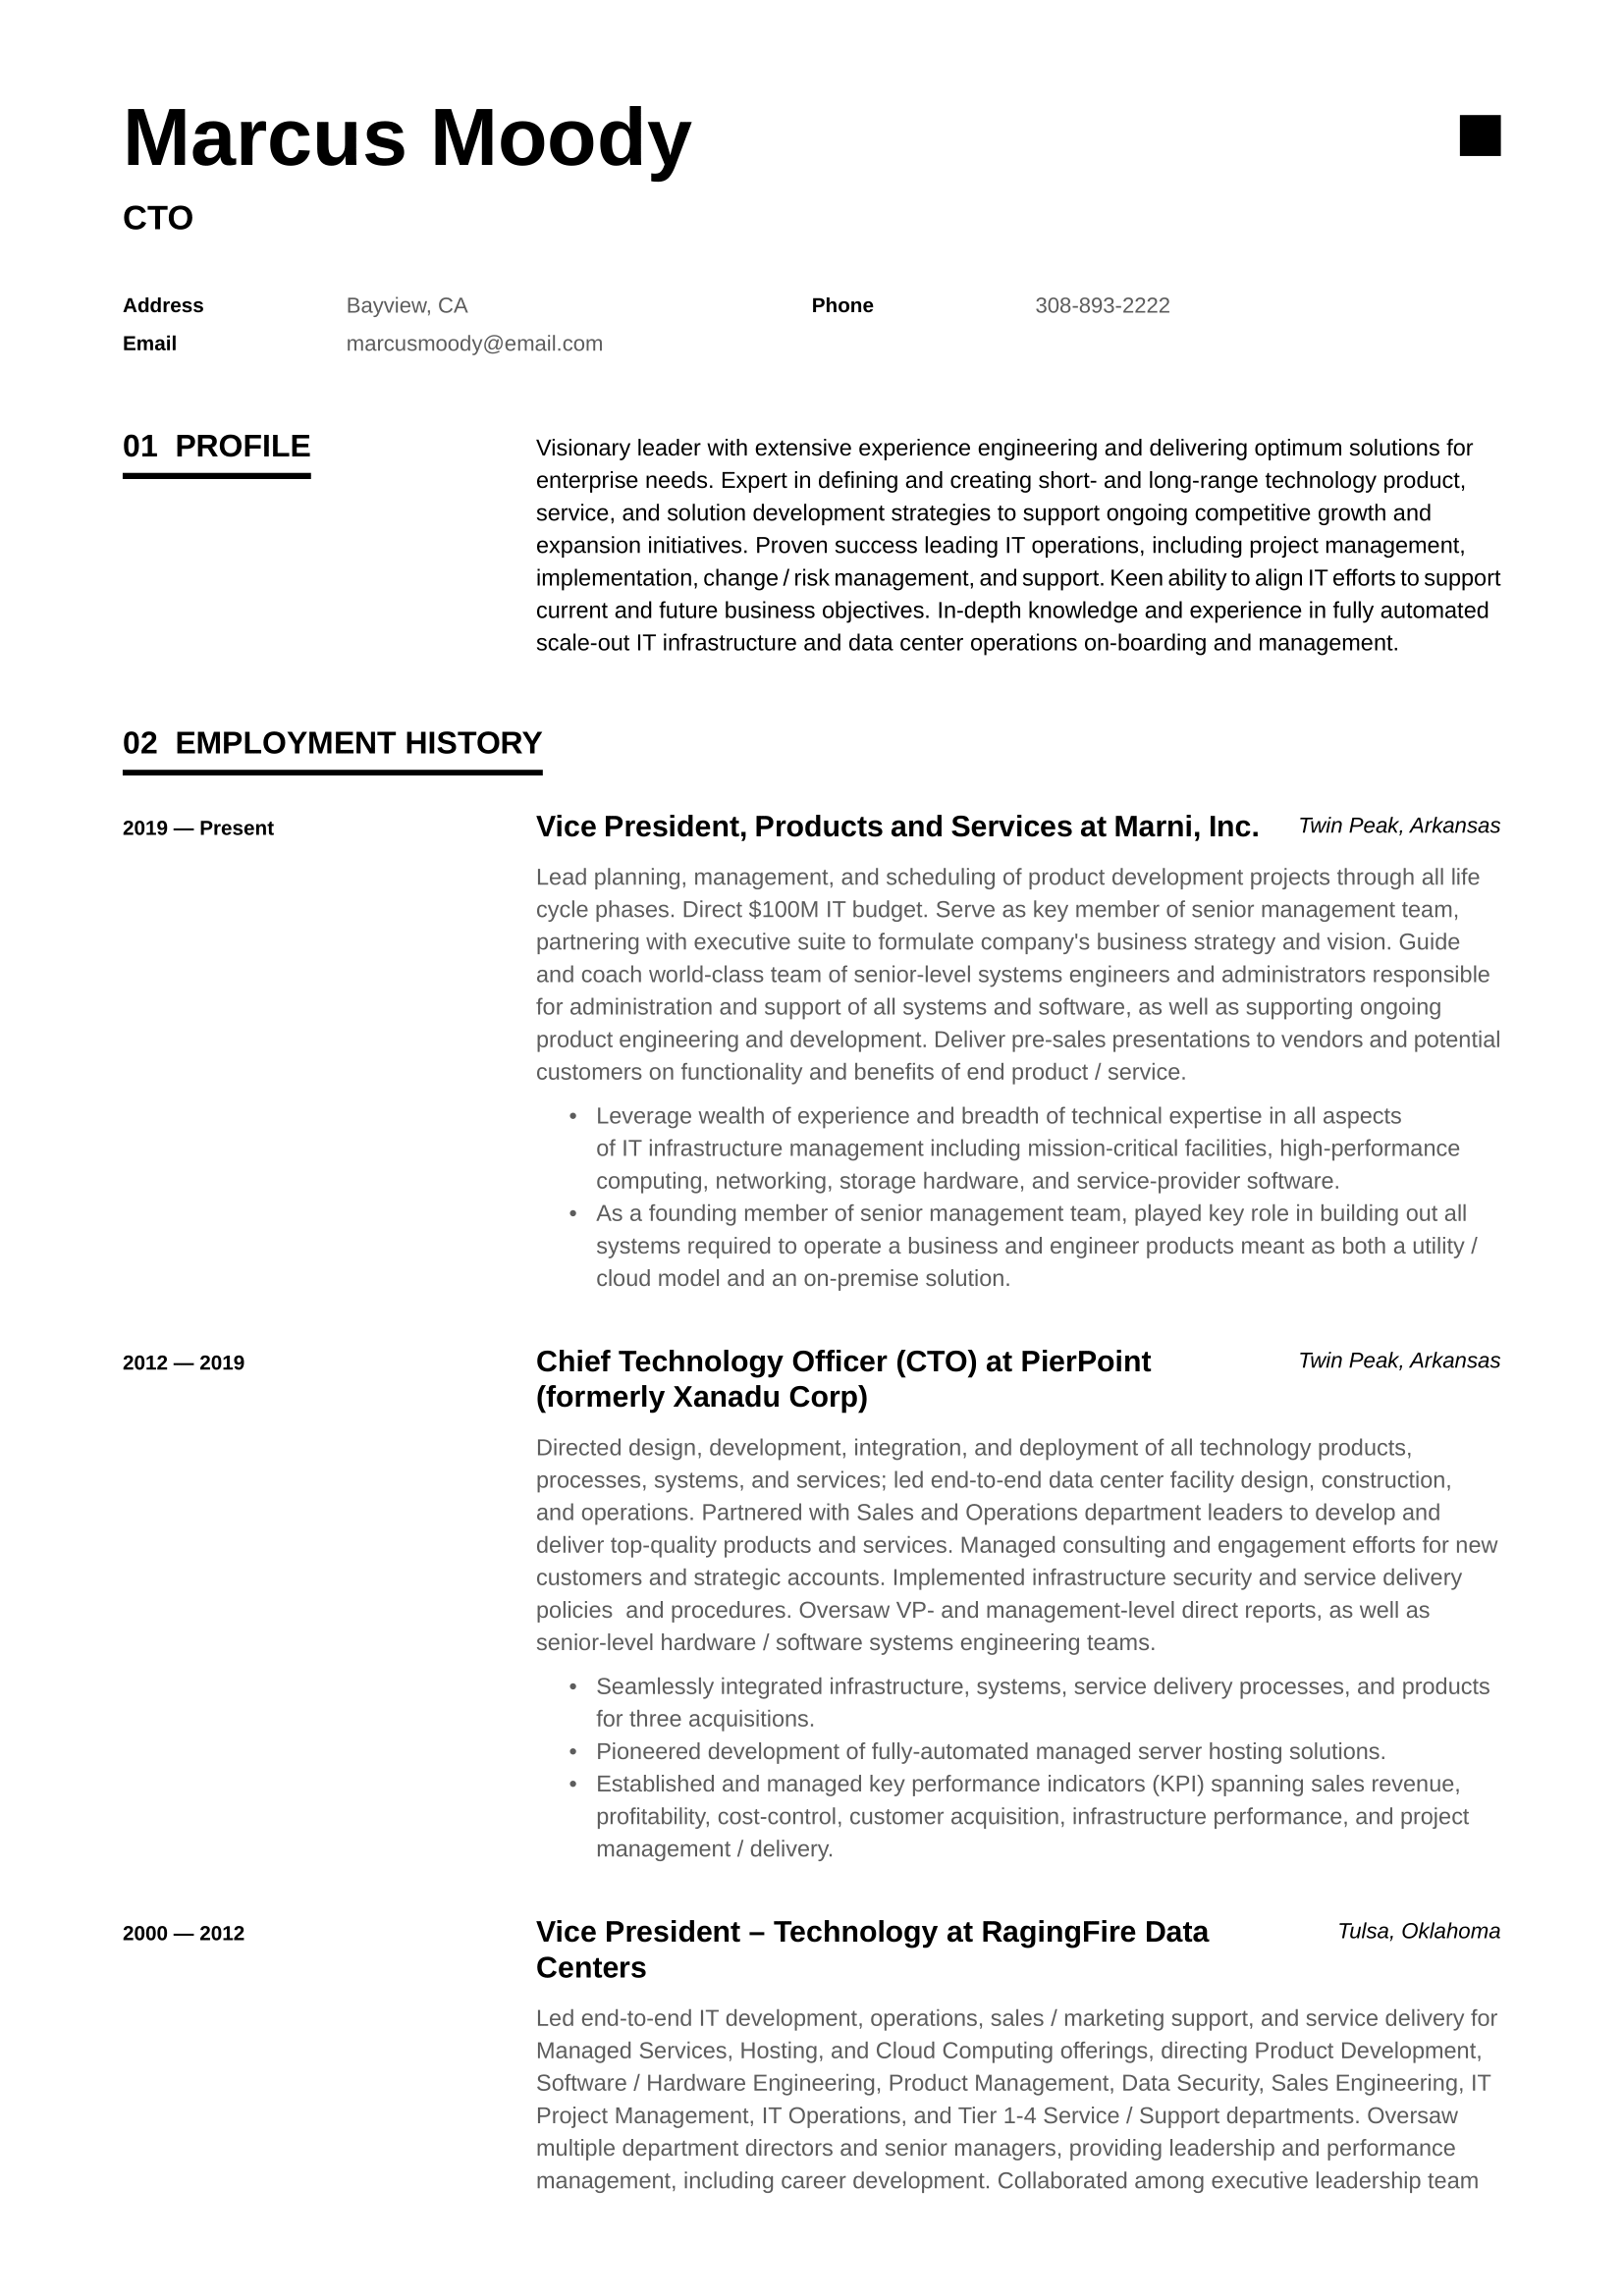 CTO Resume Example and Writing Guide